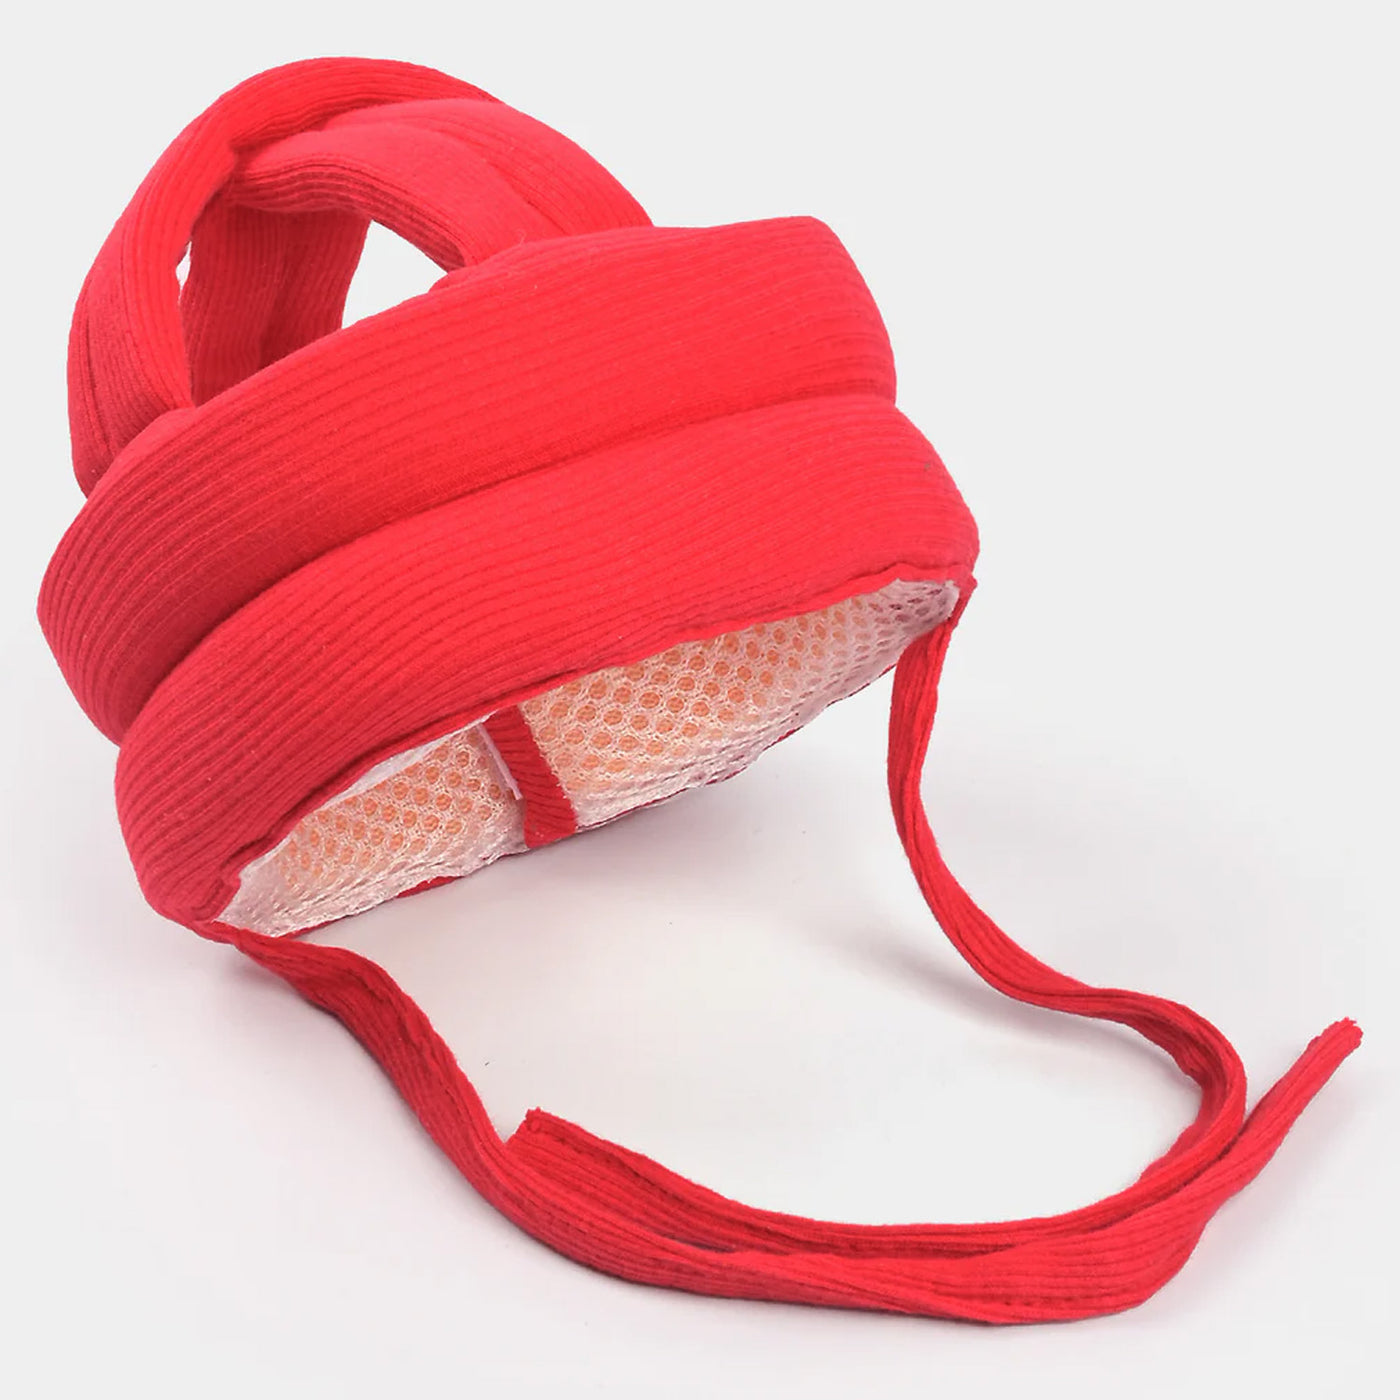 Head Protector For Baby-Red